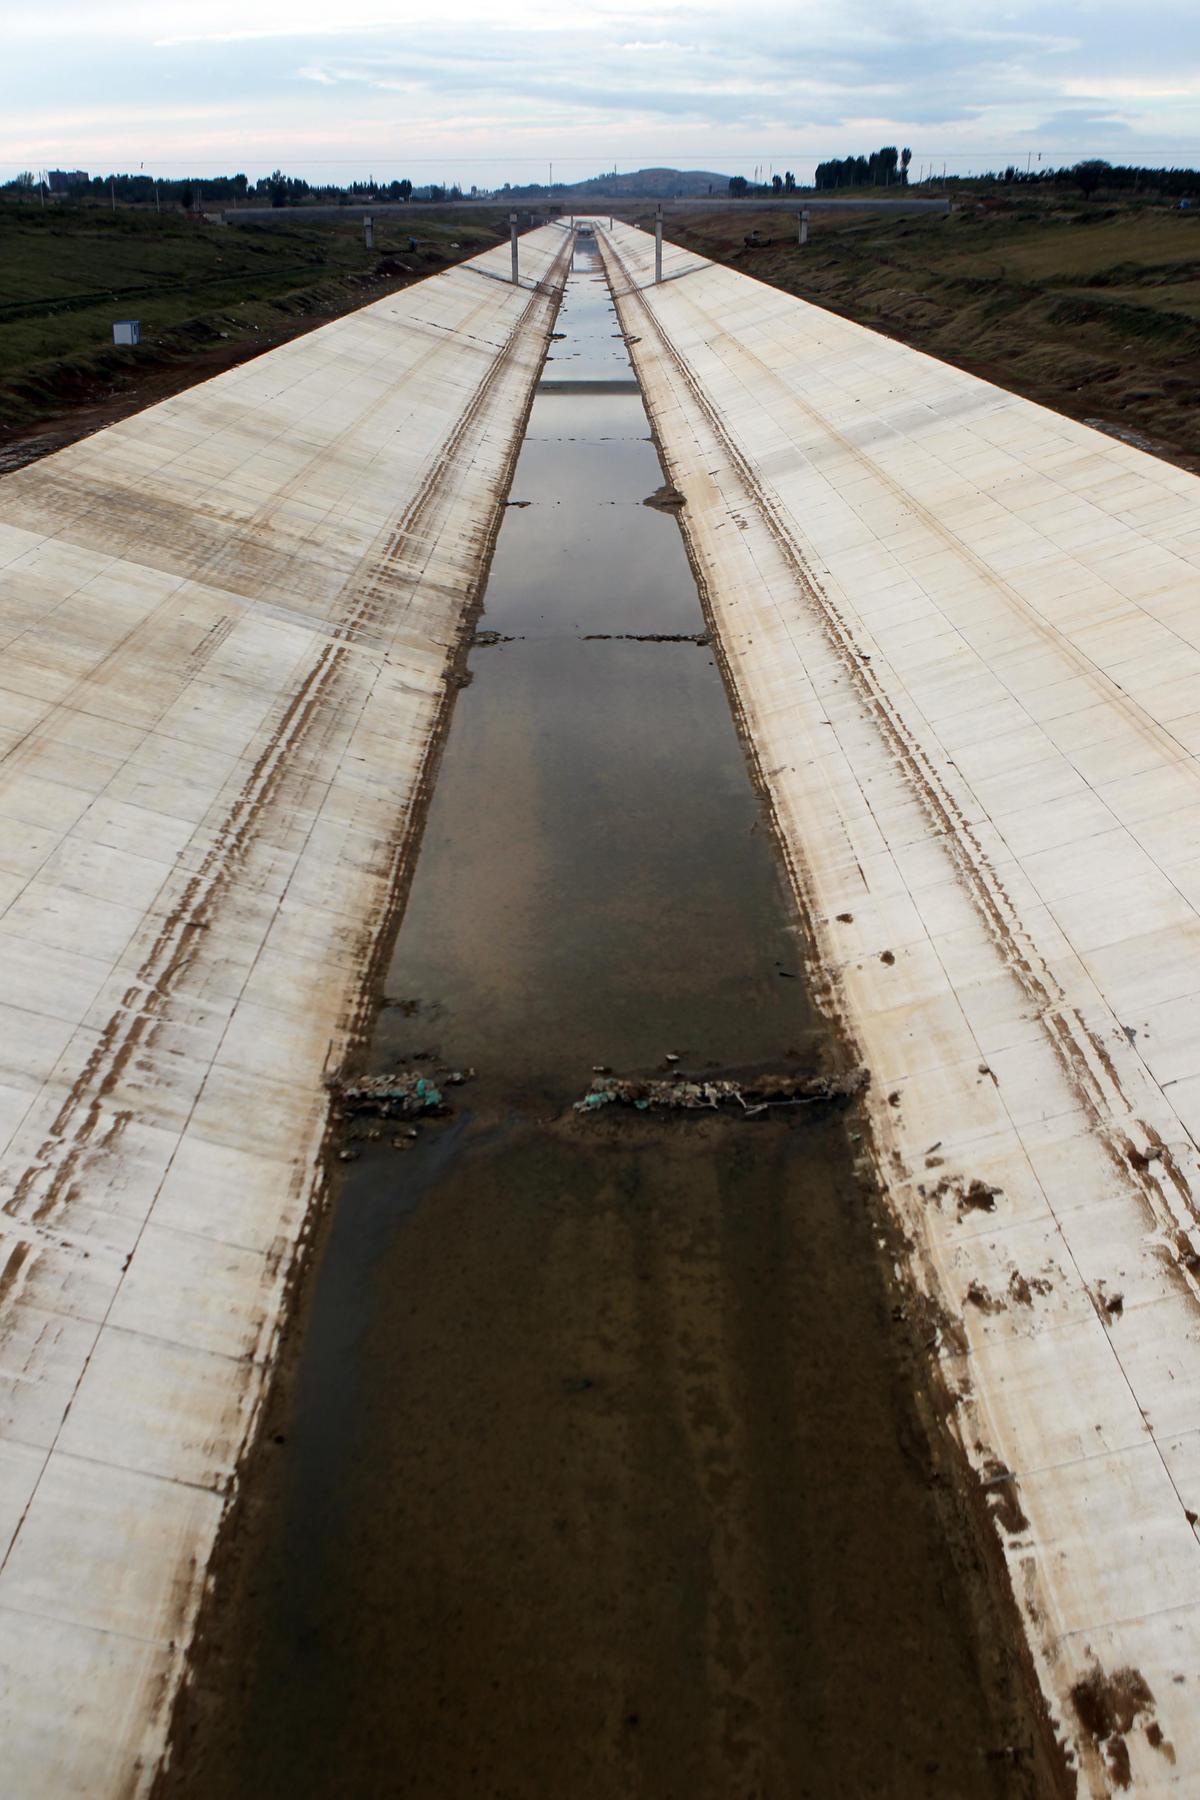 A canal used for South-to-North water Diversion plan in Nanyang, central China's Henan province, on Sept. 27, 2013. The colossal project is said to have become a waste of taxpayer money (AFP/AFP/Getty Images)